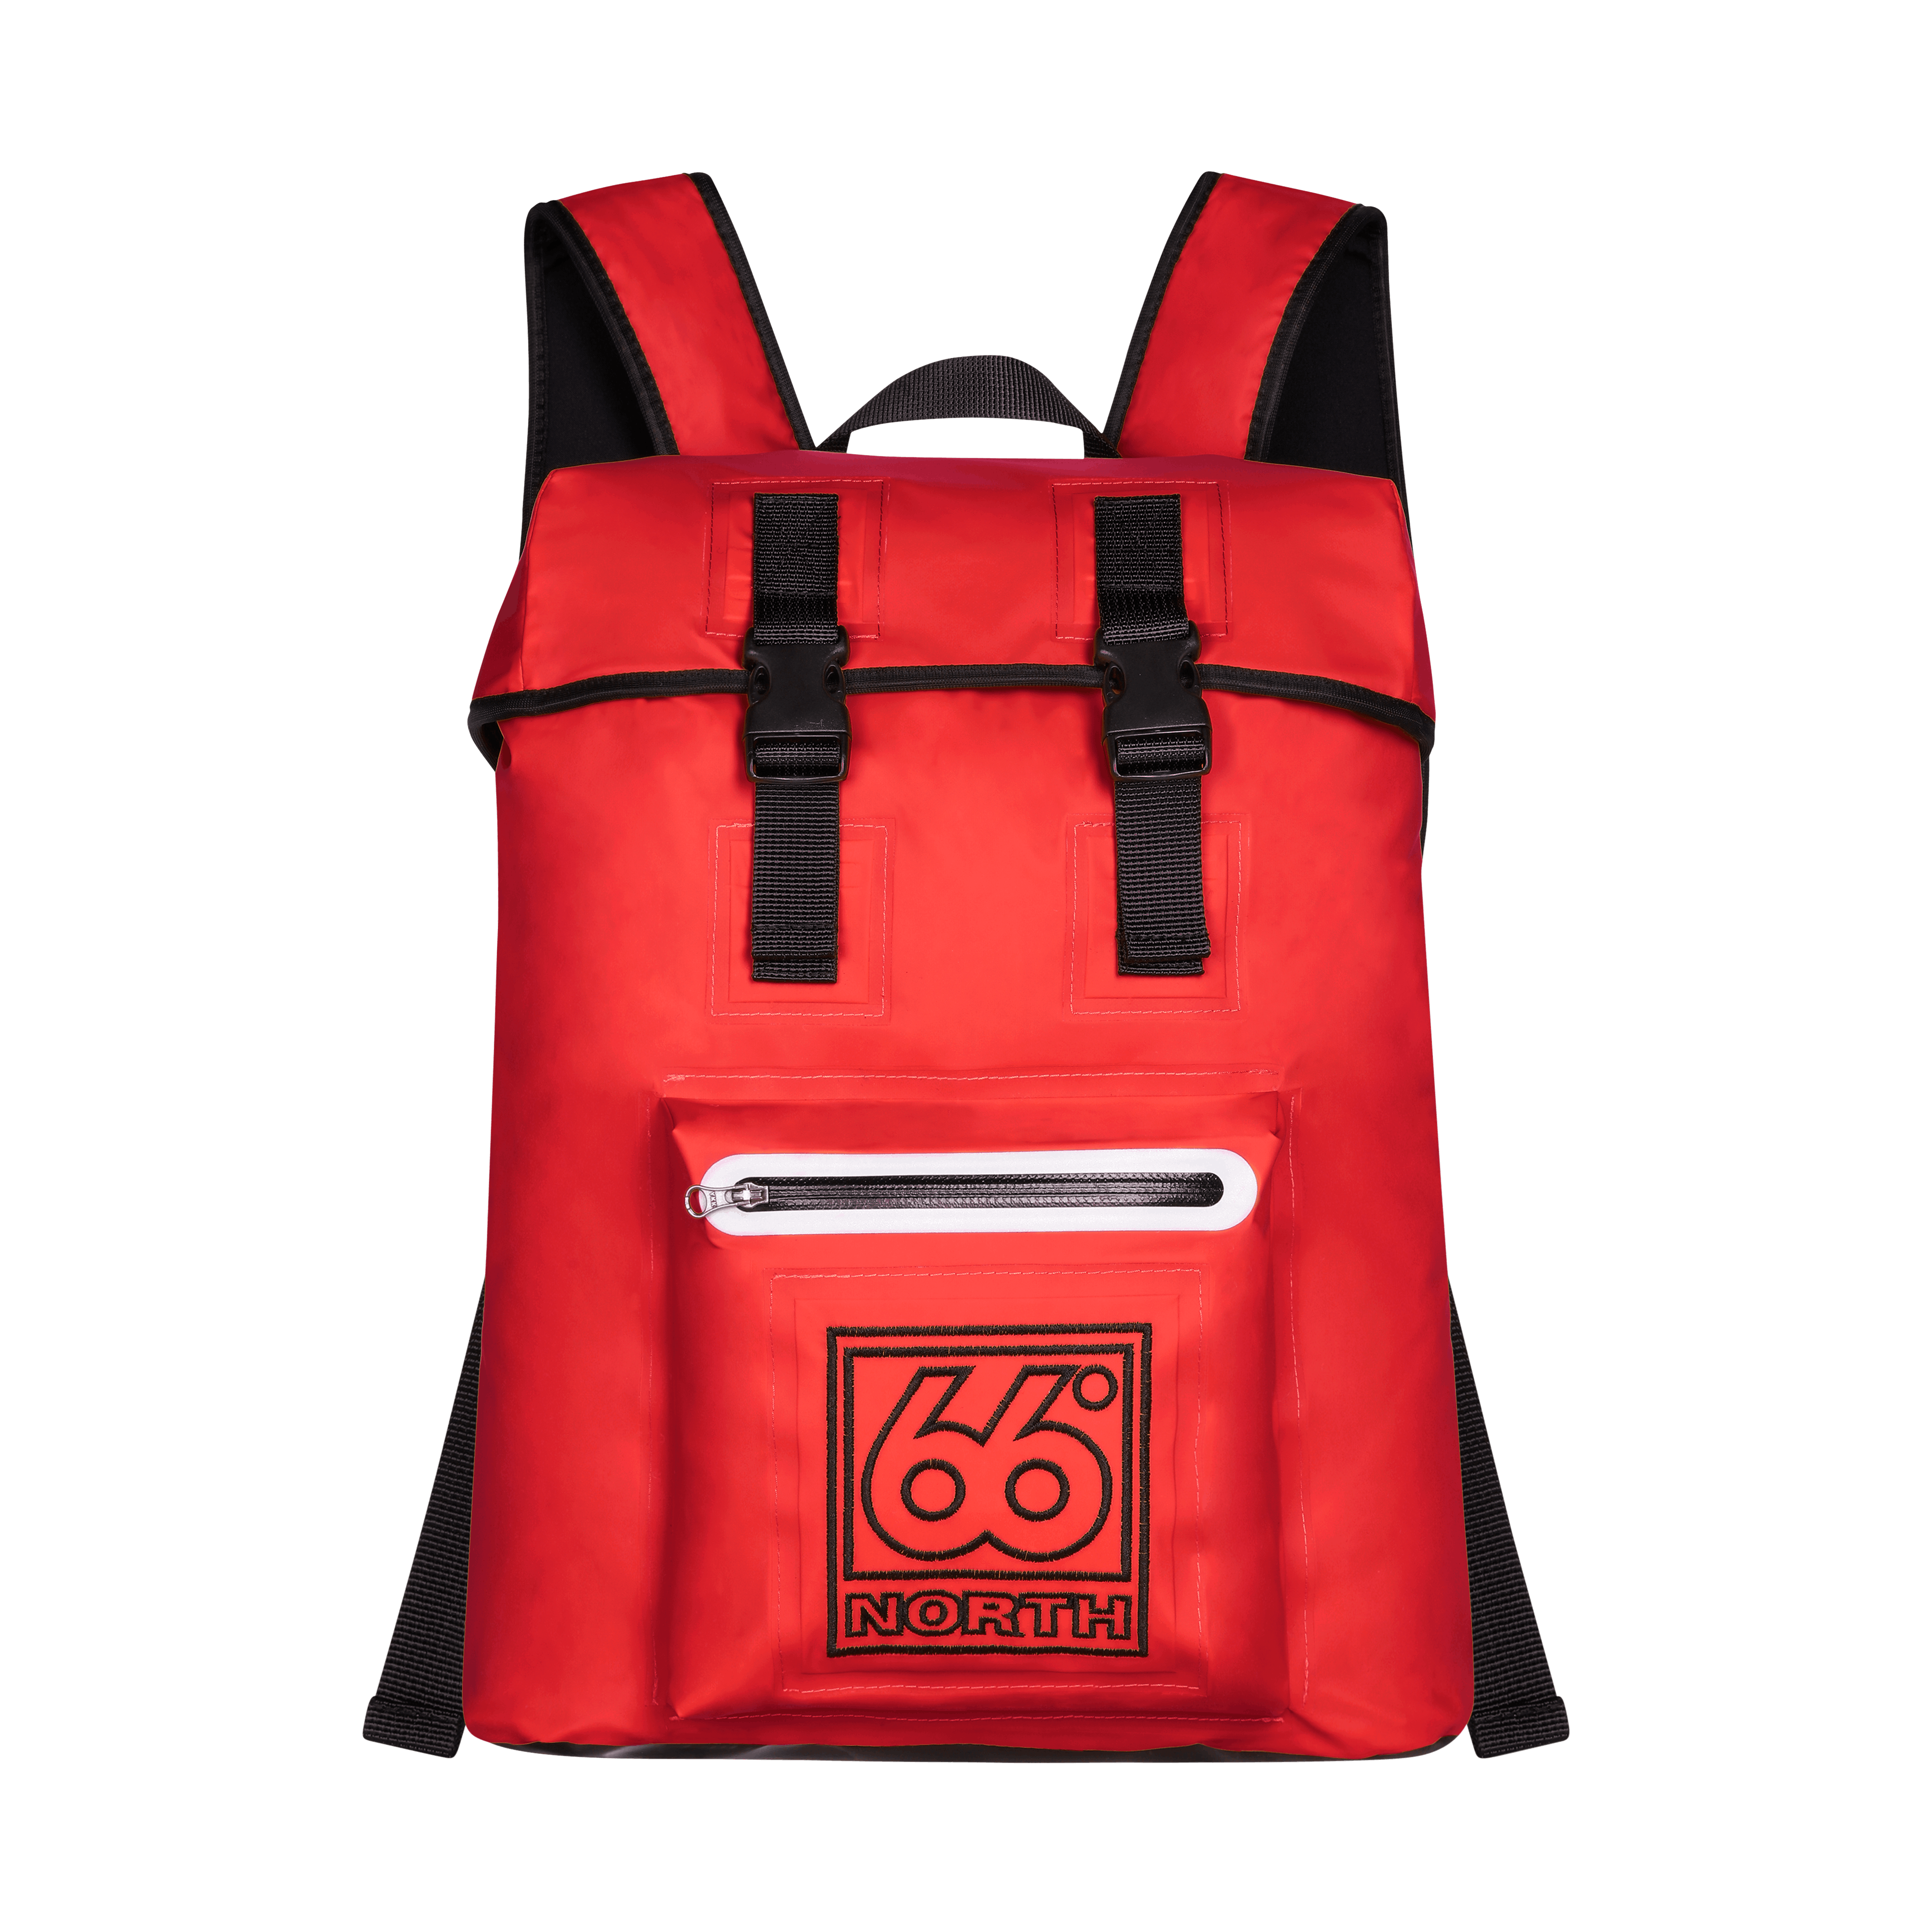 66 North Women's Backpack Accessories